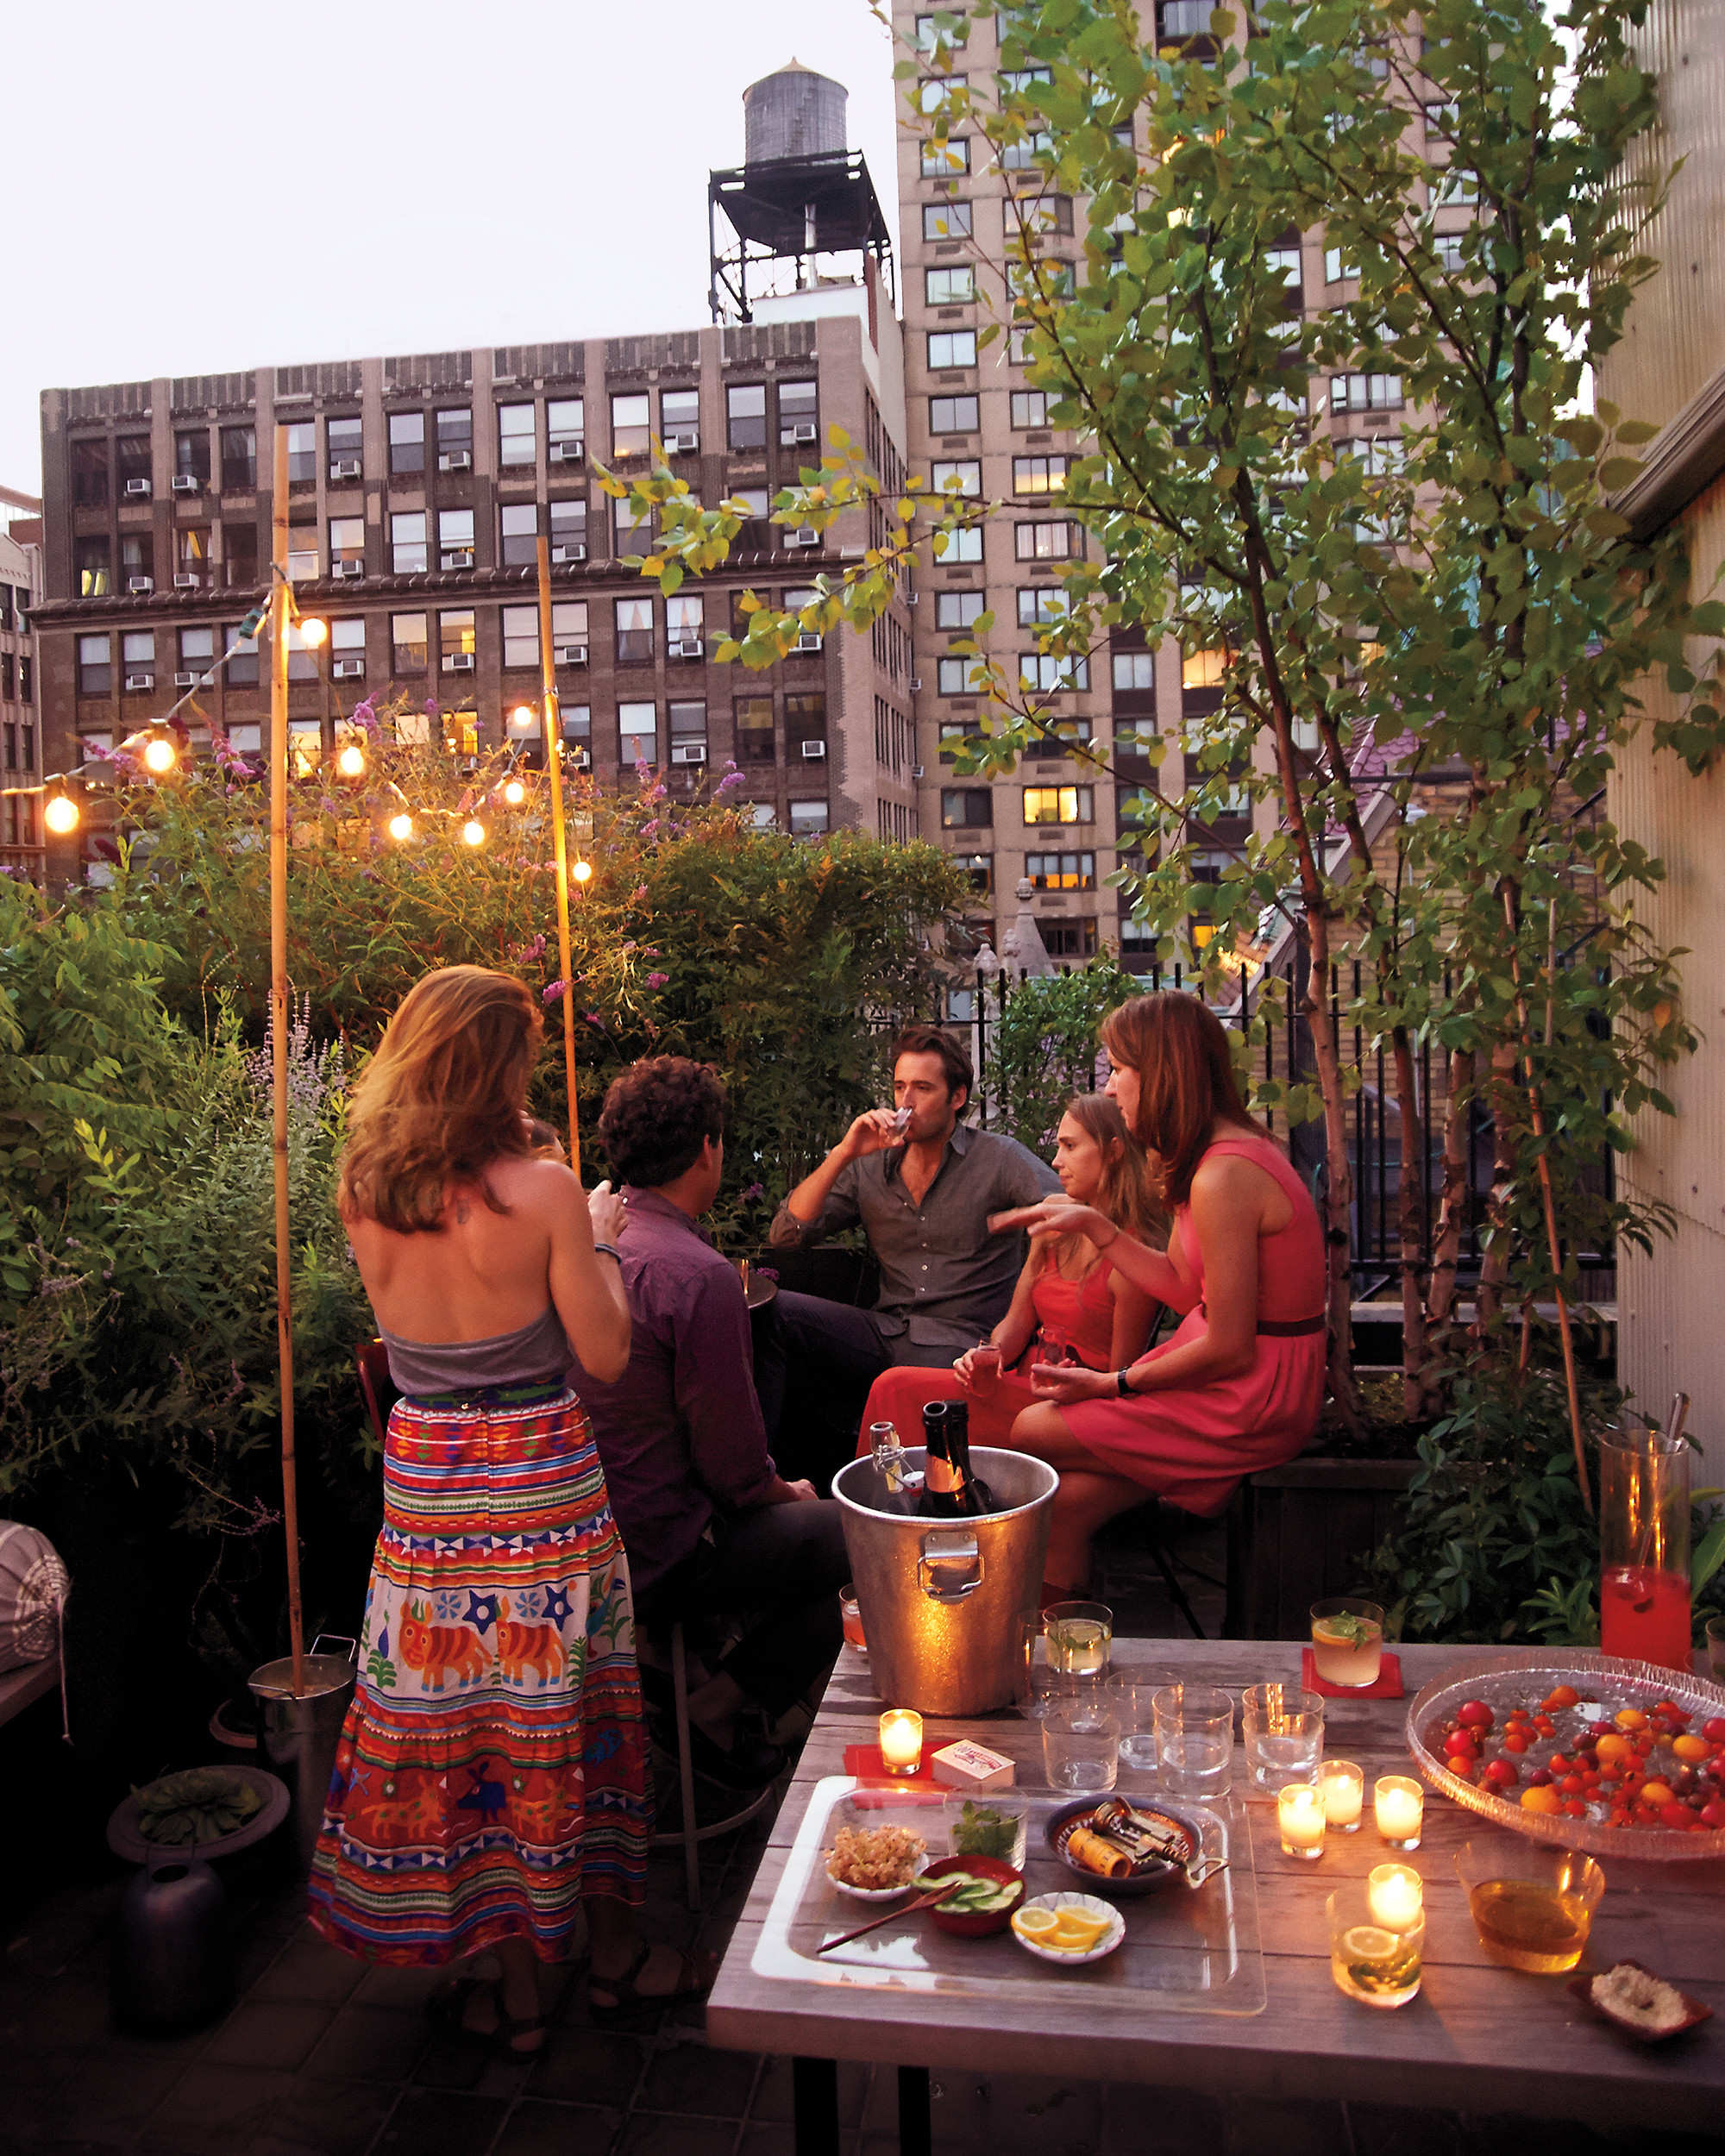 Summer Solstice Party Ideas Themes
 Throw a Summer Solstice Party in 12 Hours Flat